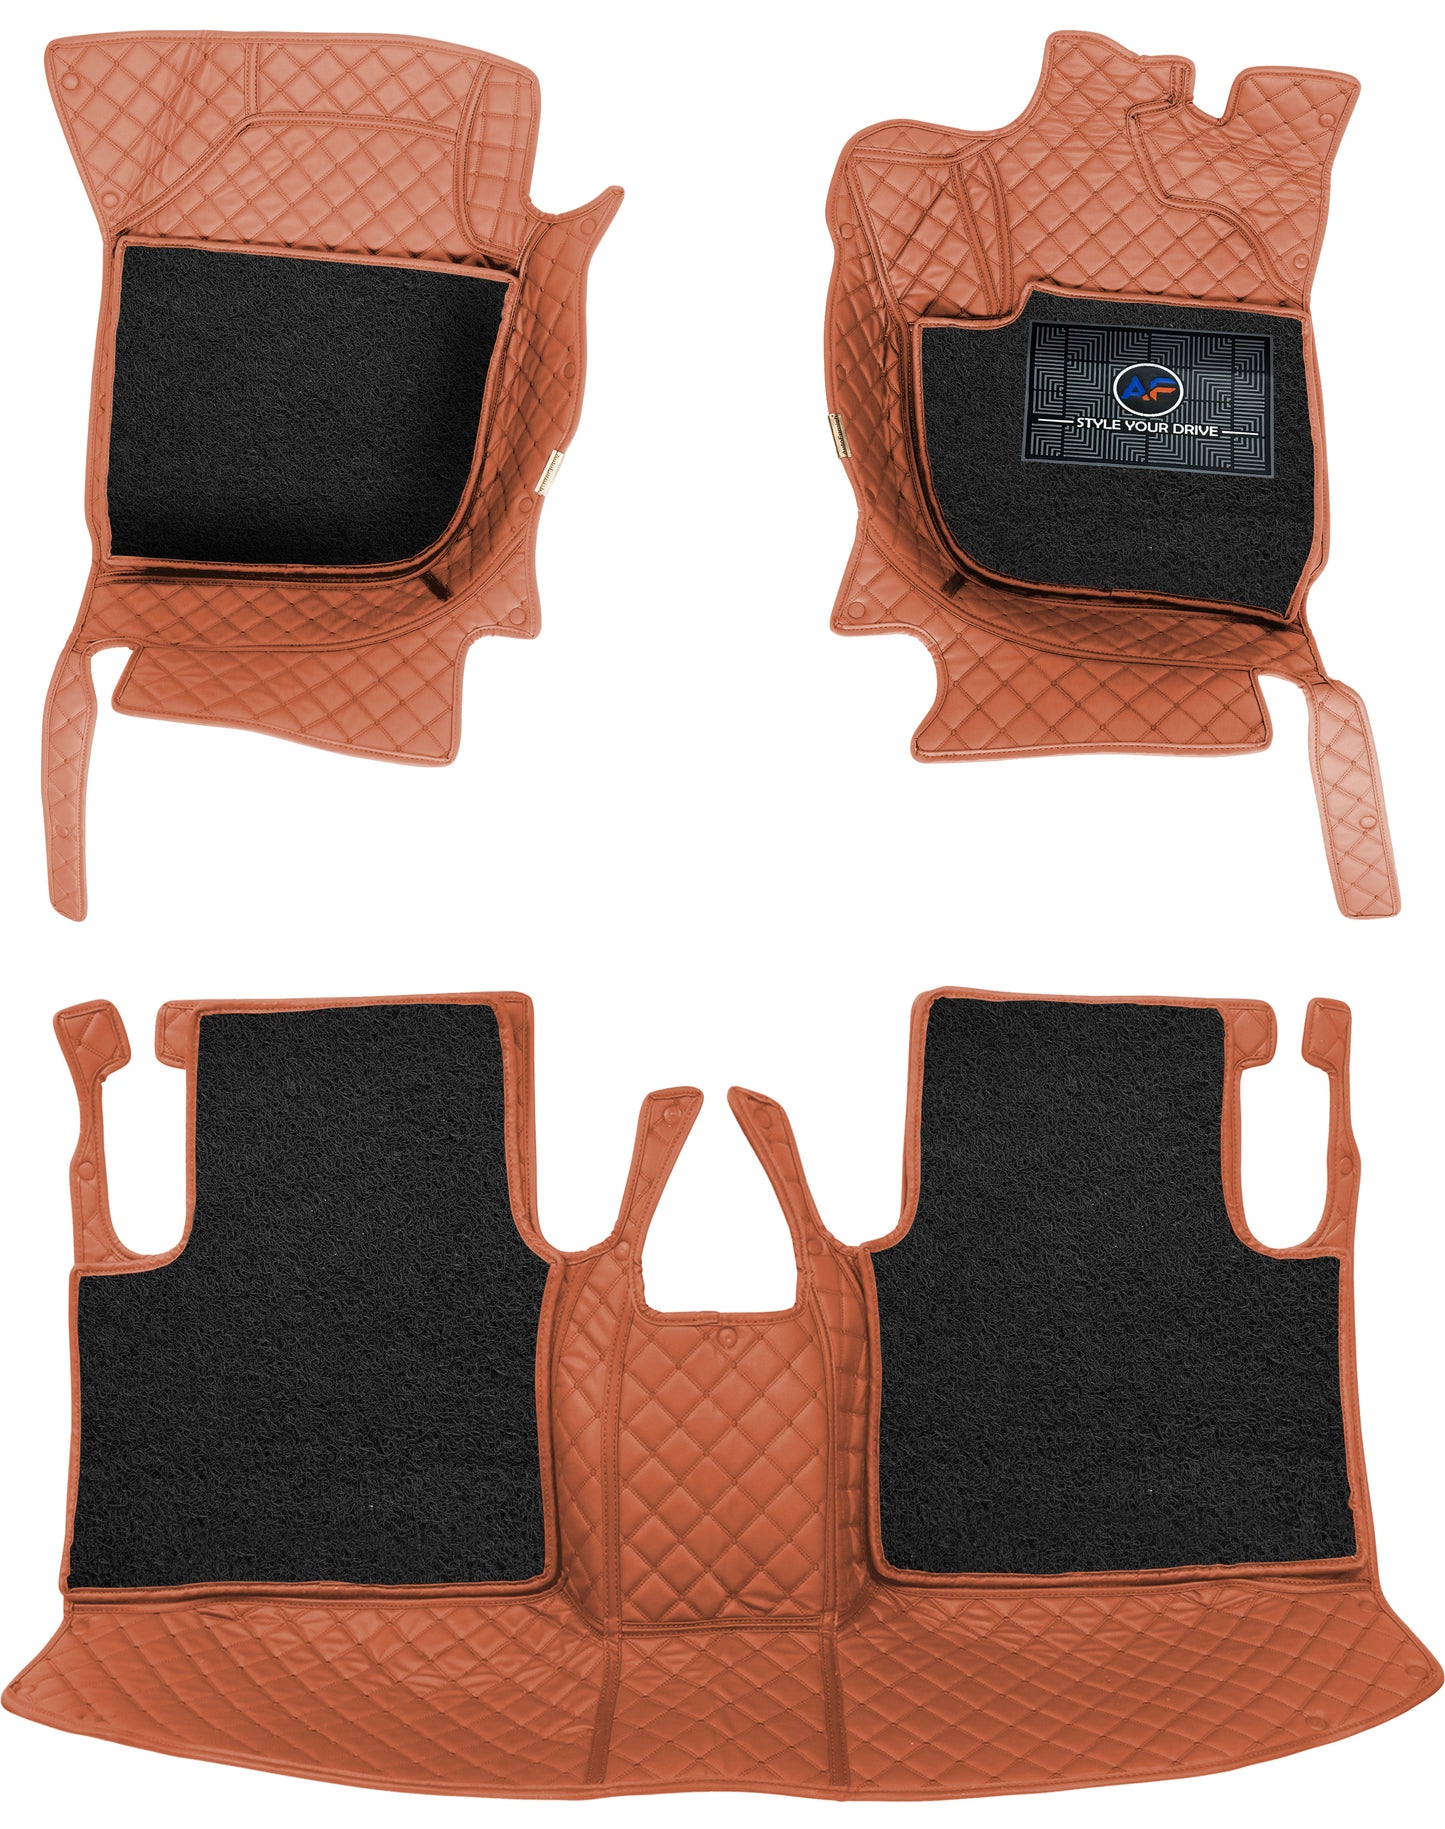 Mahindra Scorpio (Captain Seats)2014-18-7D Luxury Car Mat, All Weather Proof, Anti-Skid, 100% Waterproof & Odorless with Unique Diamond Fish Design (24mm Luxury PU Leather, 2 Rows)